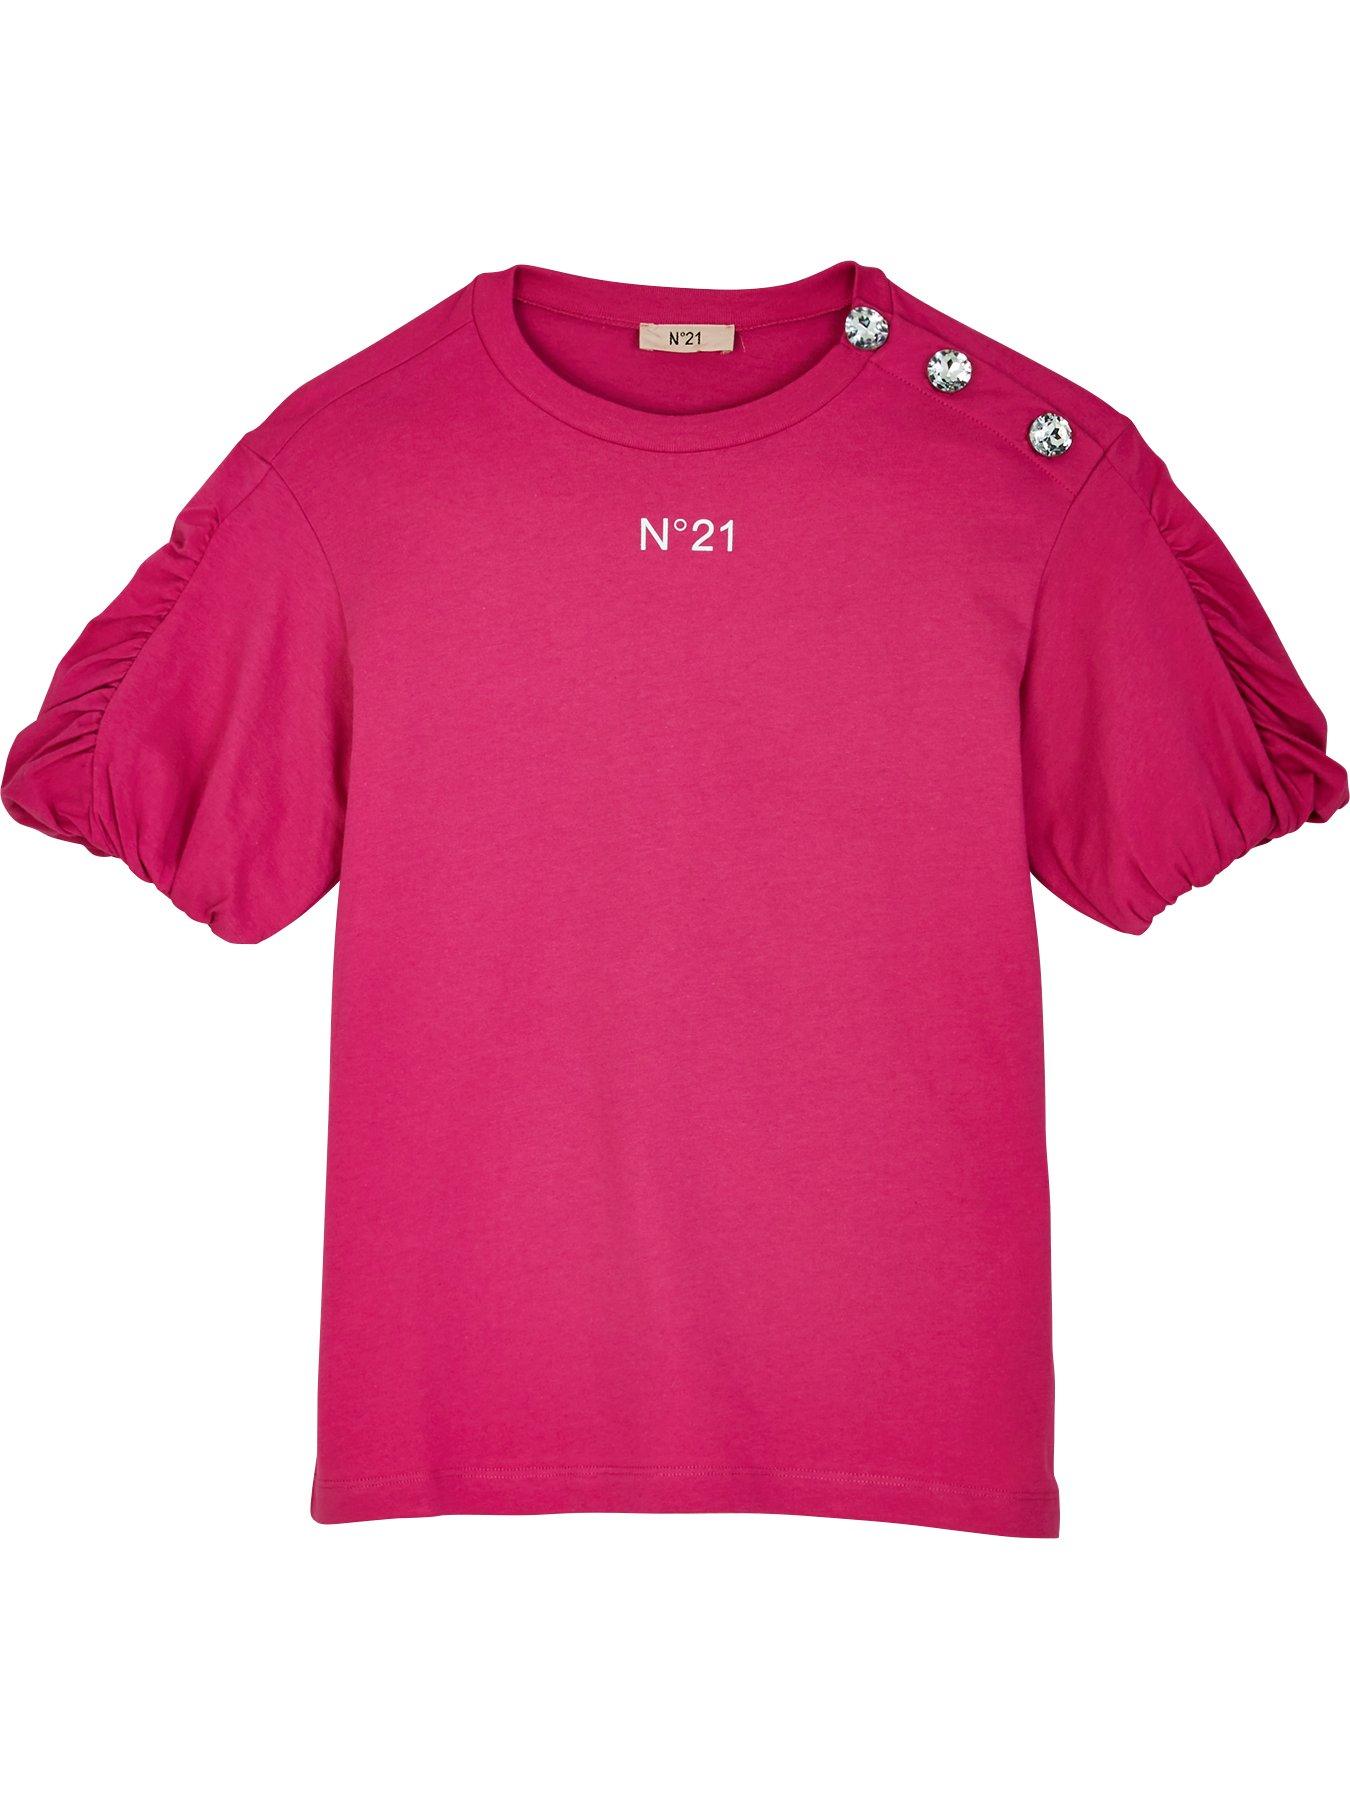 Pink No 21 Tops T Shirts Girls Clothes Designer Brands Www Very Co Uk